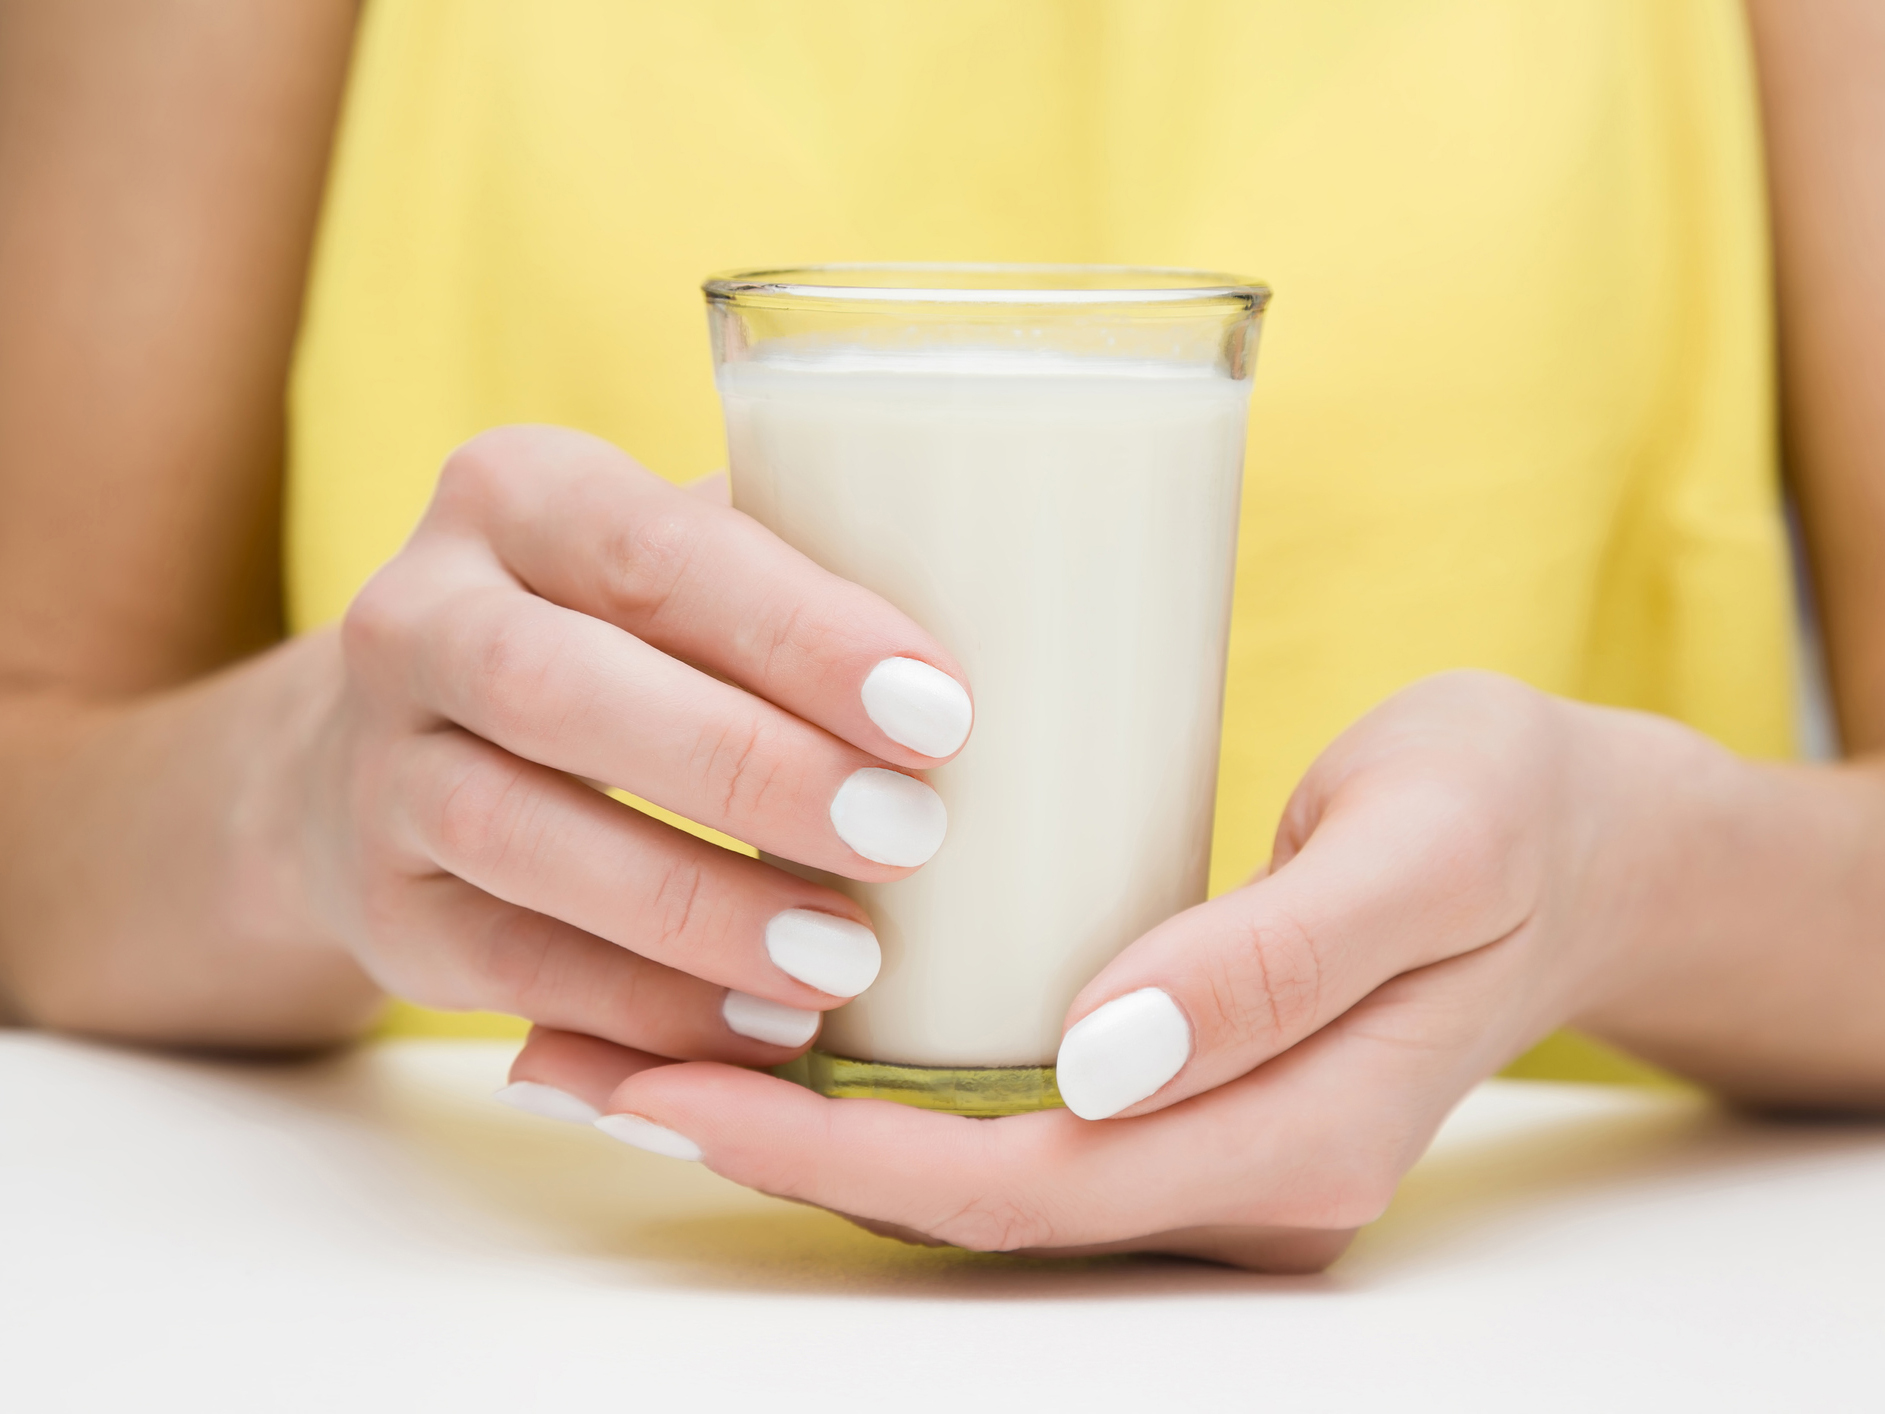 You can measure your breast cancer risk by how much milk you drink